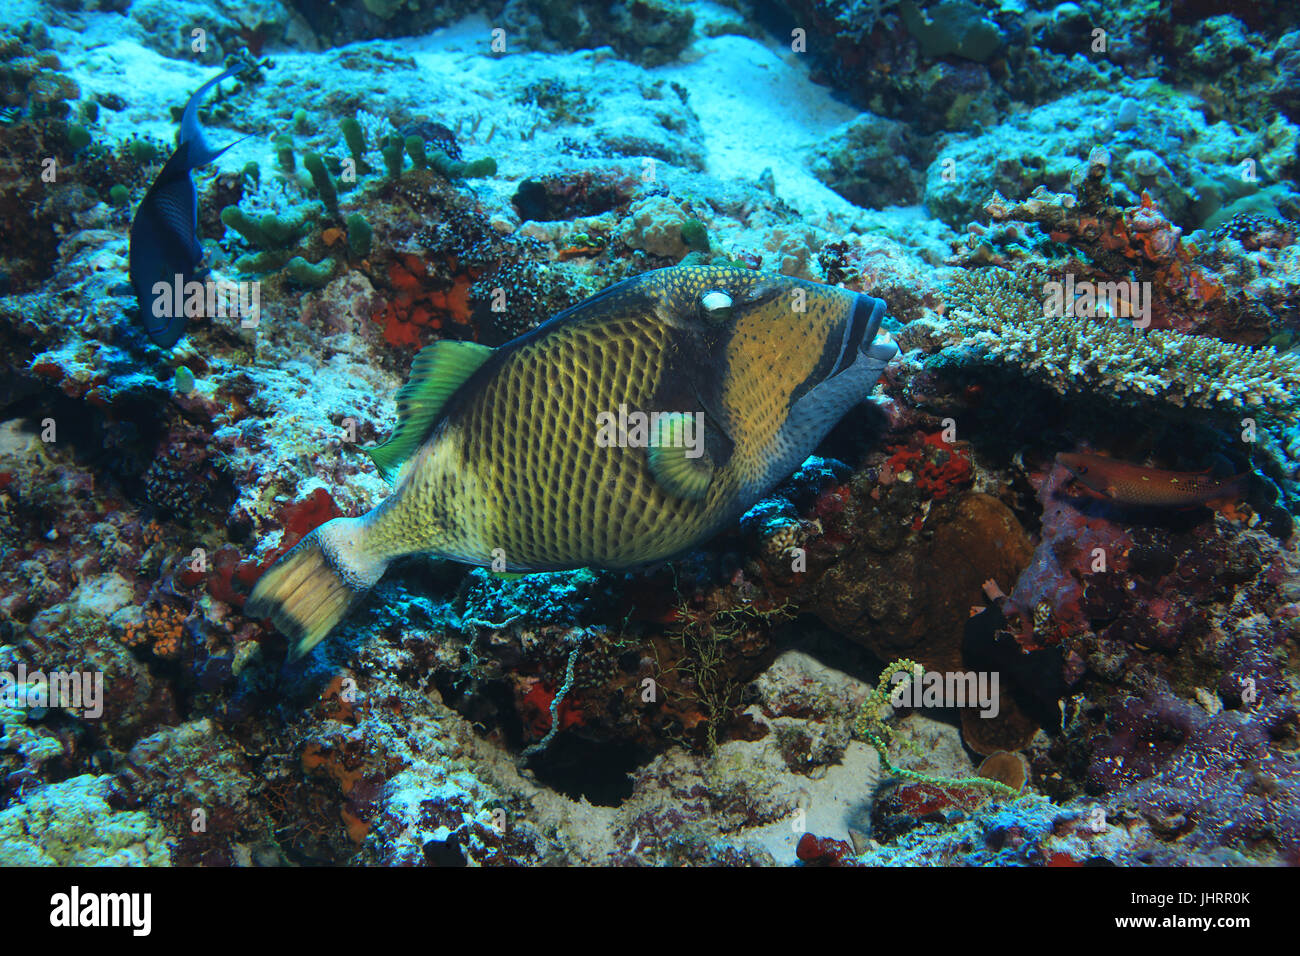 Titan triggerfish (Balistoides viridescens) underwater in the tropical reef of the indian ocean Stock Photo